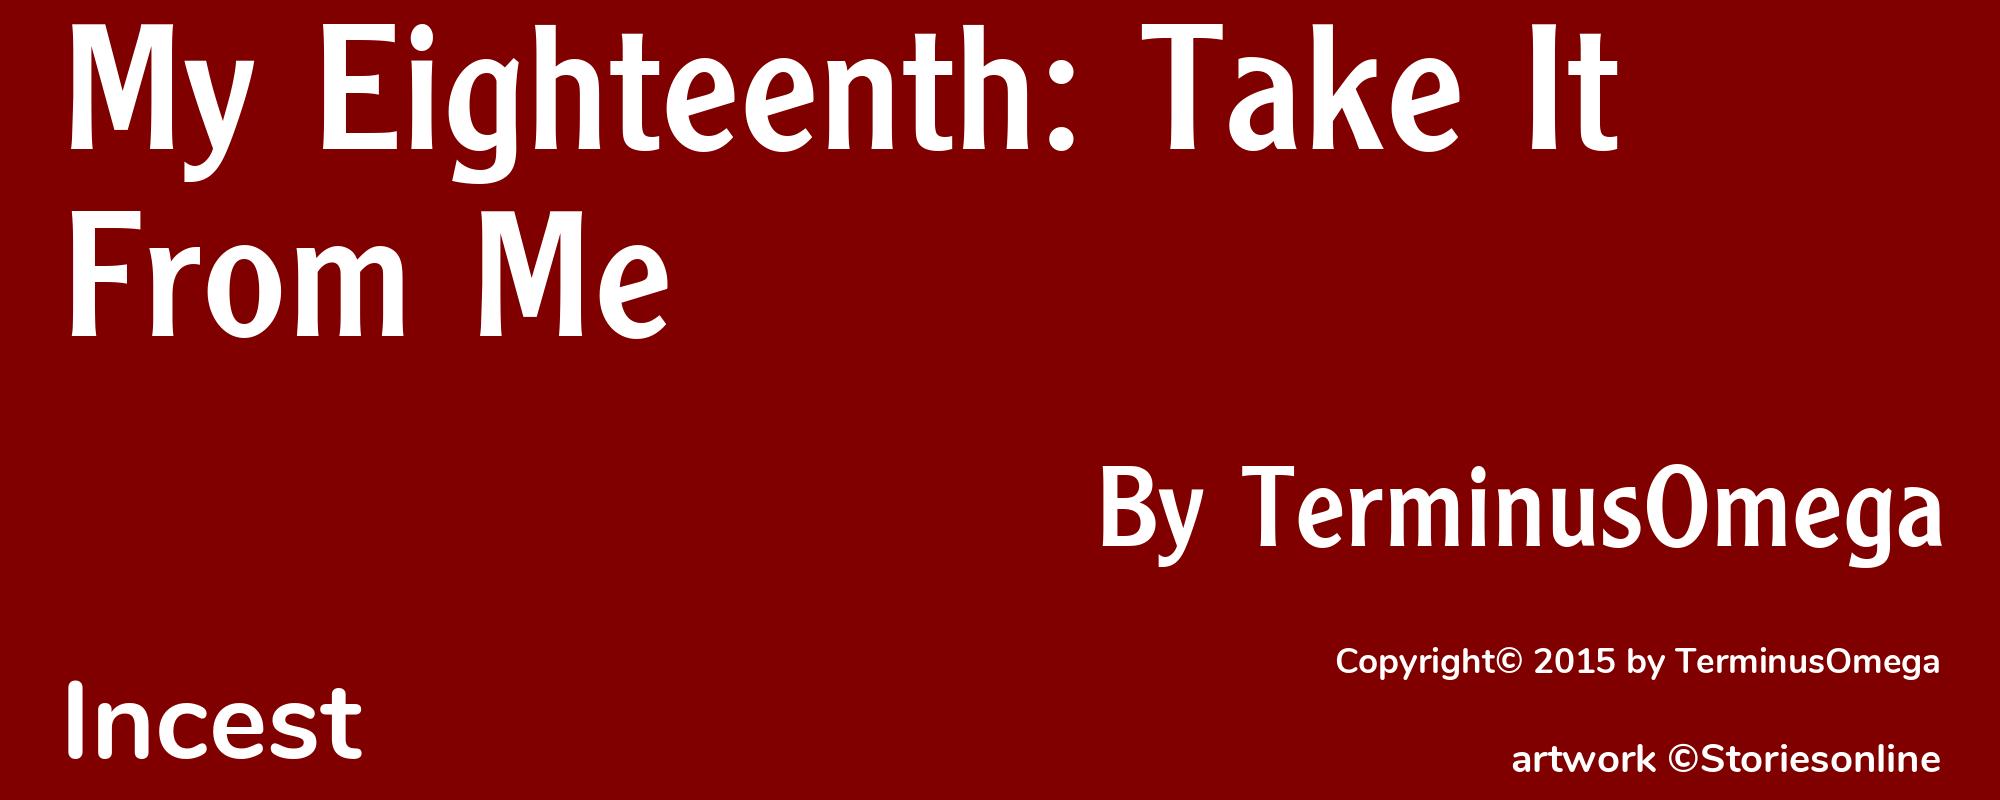 My Eighteenth: Take It From Me - Cover